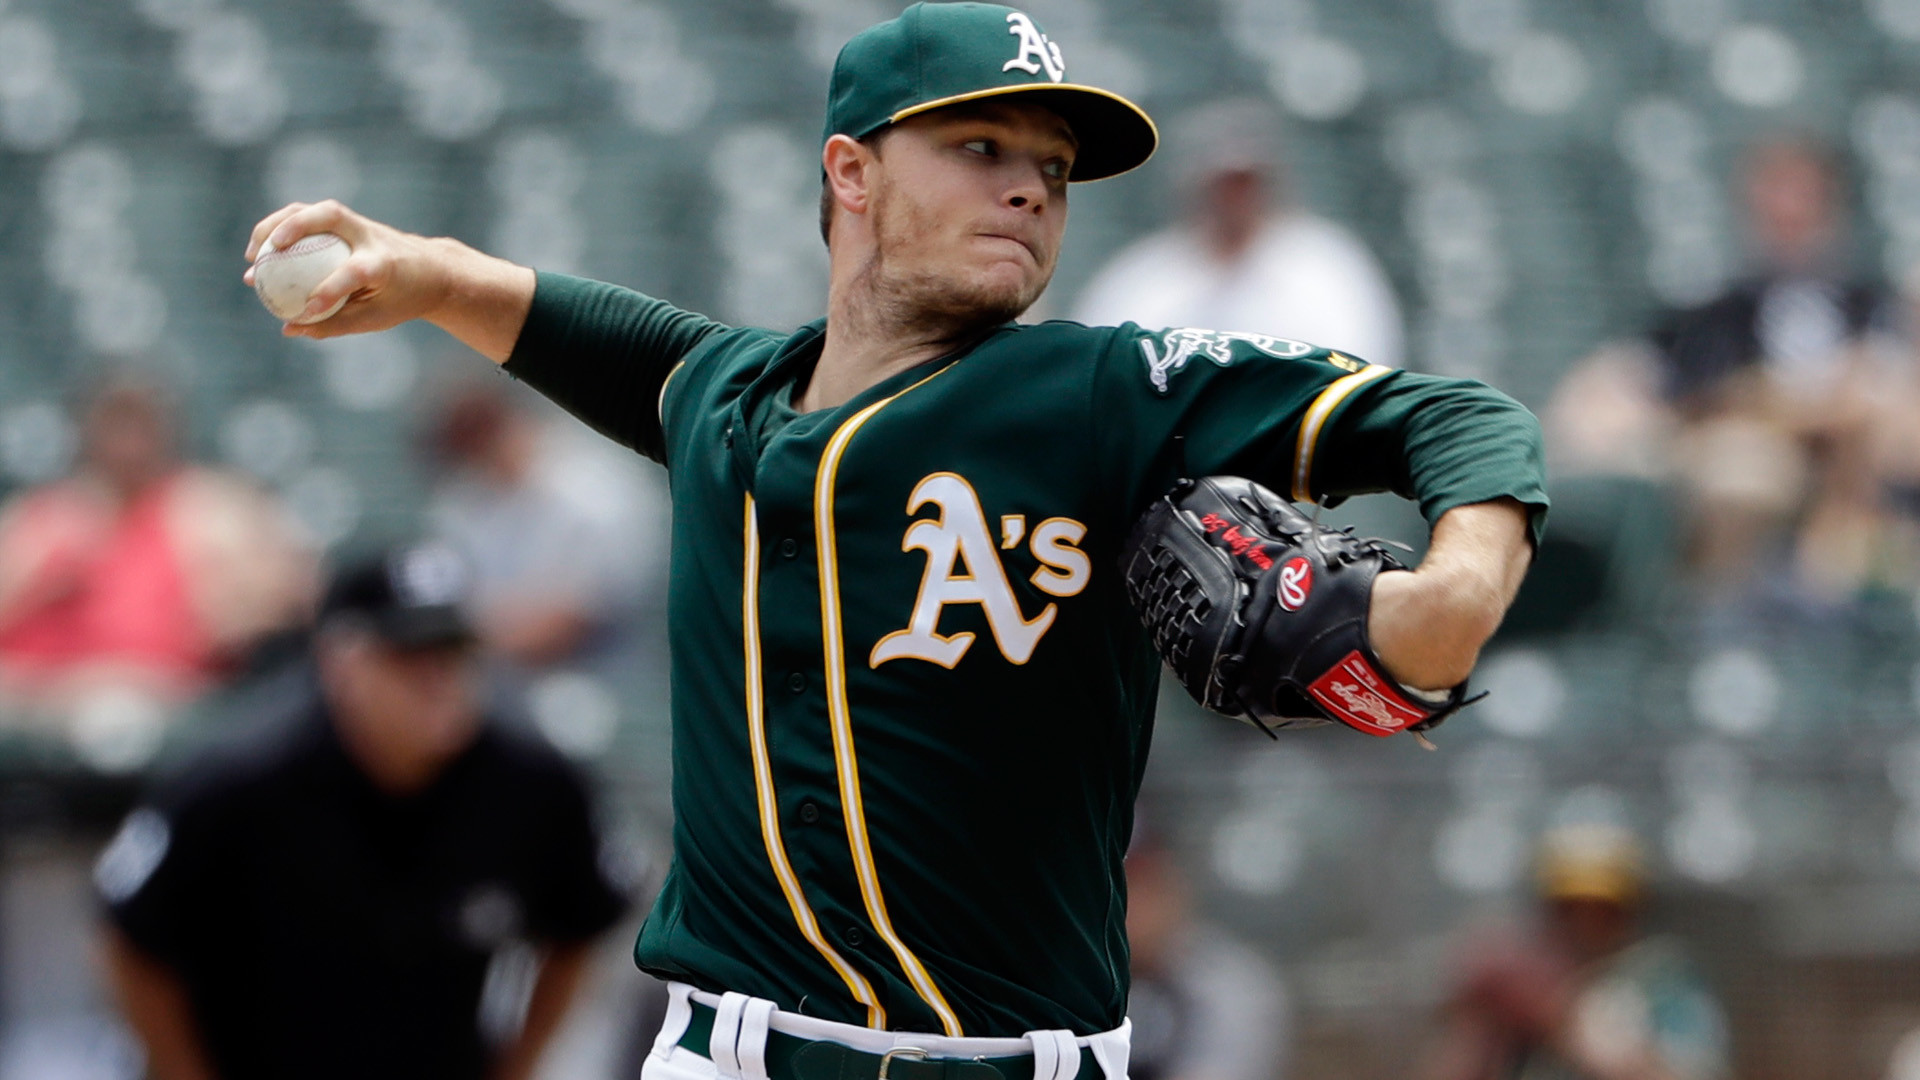 1920x1080 Sonny Gray brushes off false trade rumor as A's blank Indians | NBCS Bay  Area